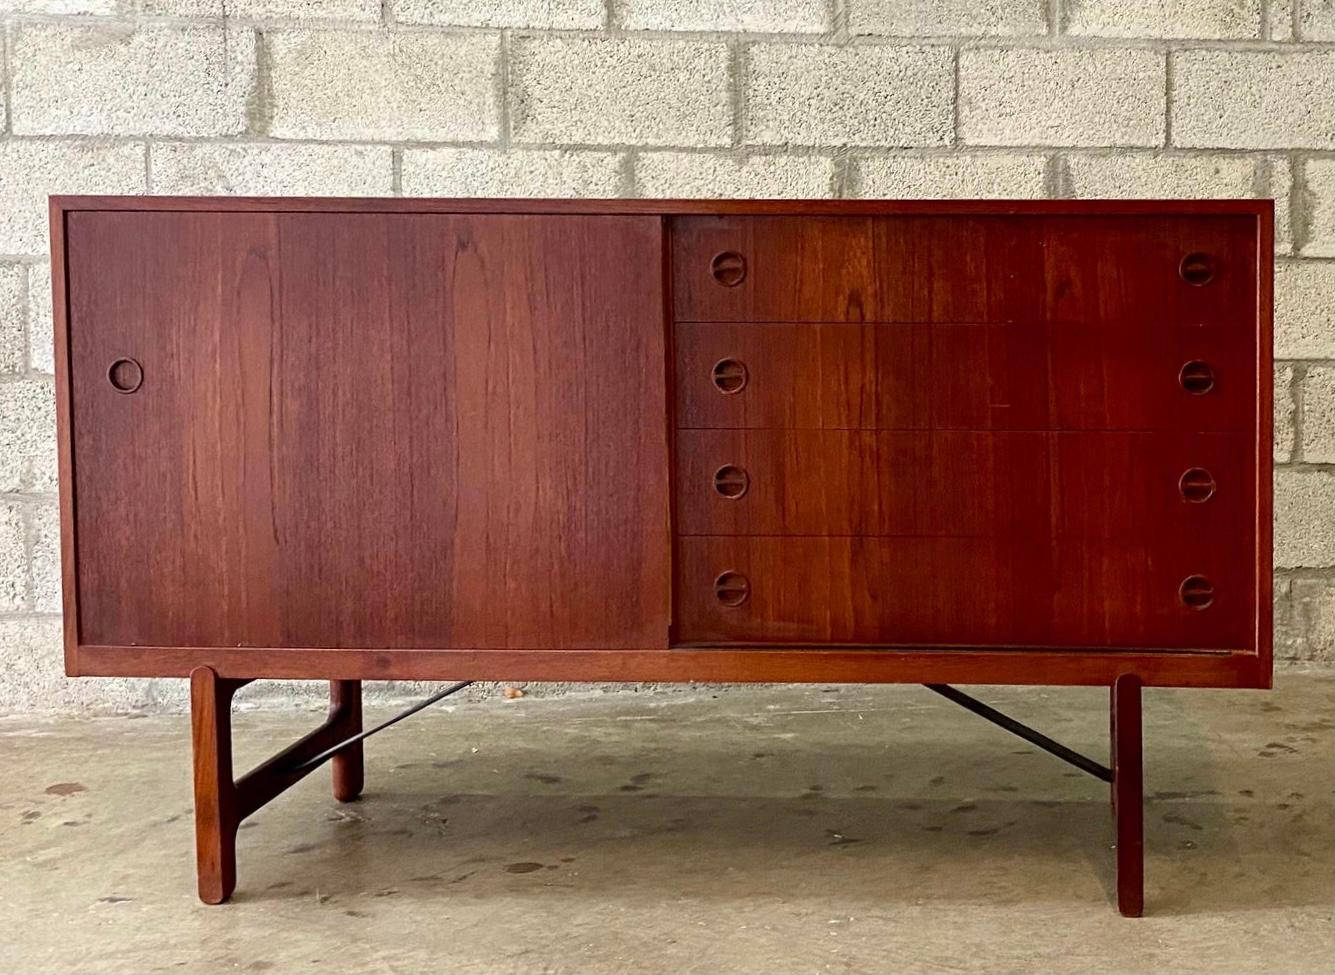 Incredible vintage MCM Danish teak credenza. Designed by the legends Aksel Bender Madsen and Ejner Larsen. Crafted by Narvstead Mobelfabrik in the 1960s. A super rare and elusive piece. Beautiful teak wood grain with sliding doors.